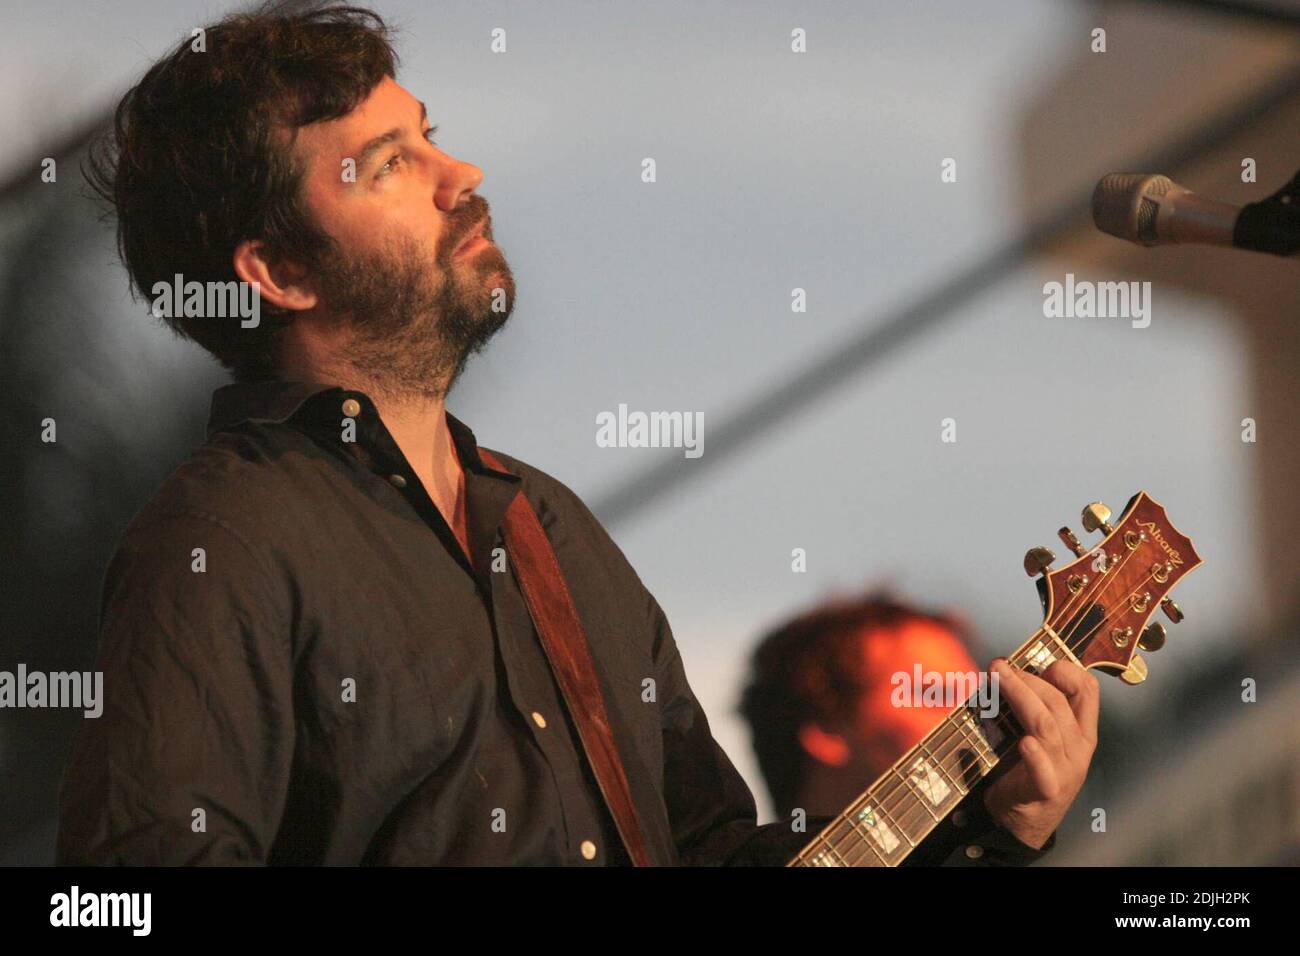 Duncan Sheik performs at The Florida Sunfest Festival. 05/05/06 Stock Photo